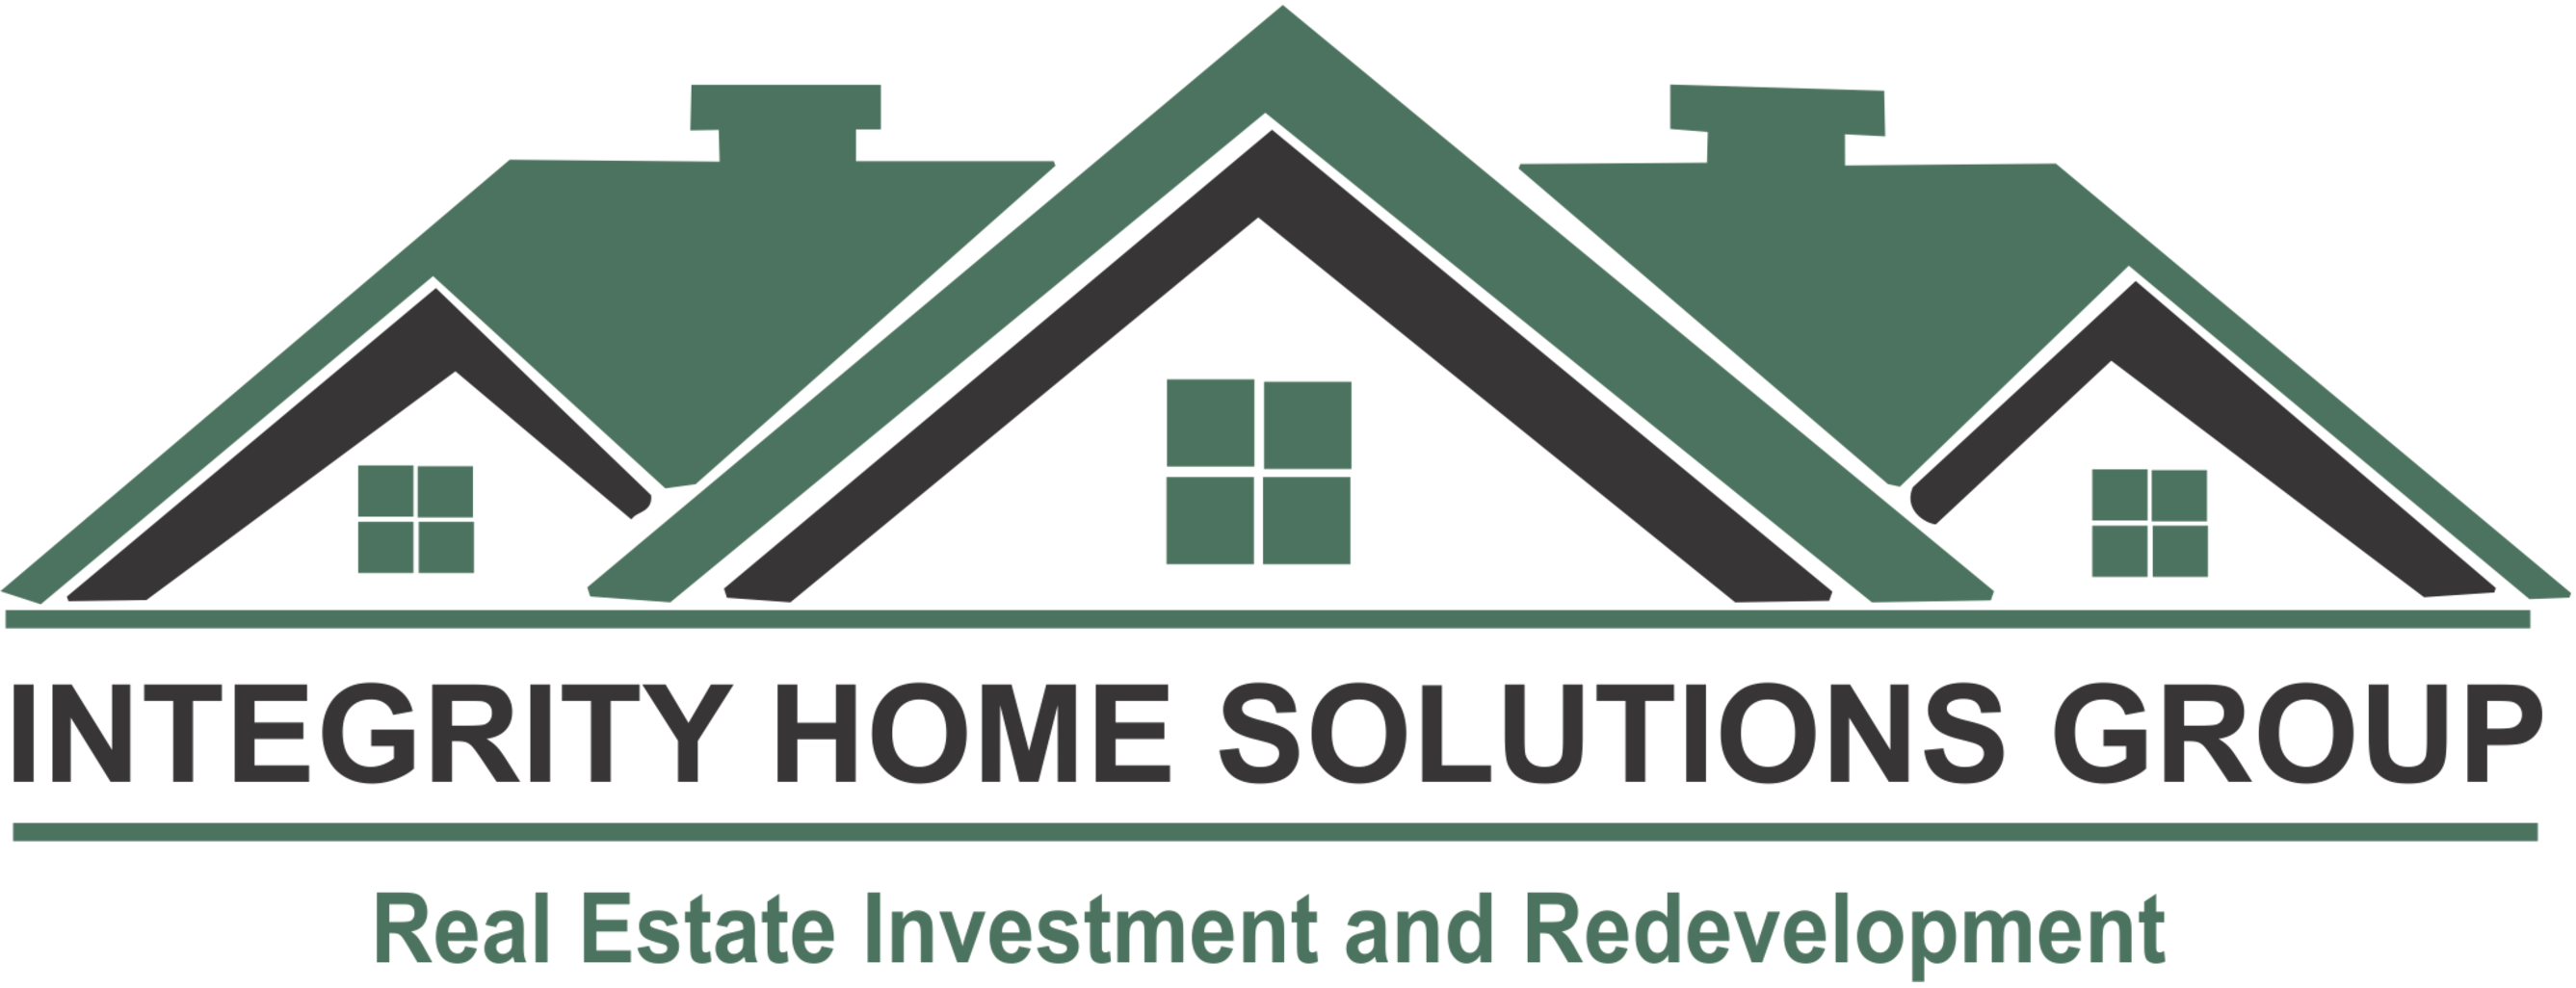 Integrity Home Solutions Group, LLC